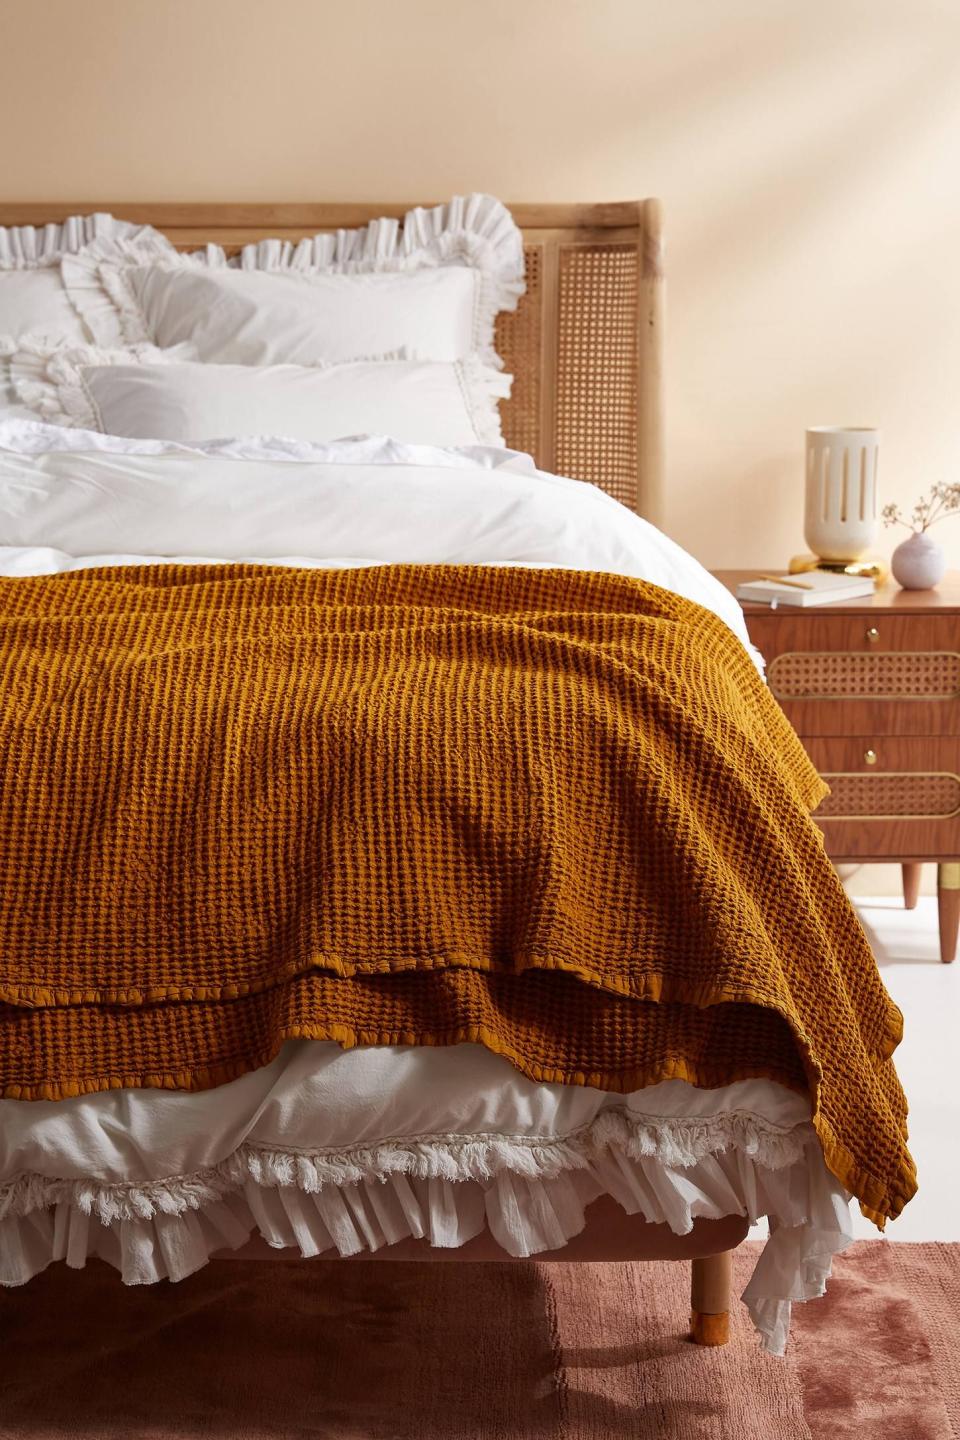 2) Woven Waffle Bed Blanket